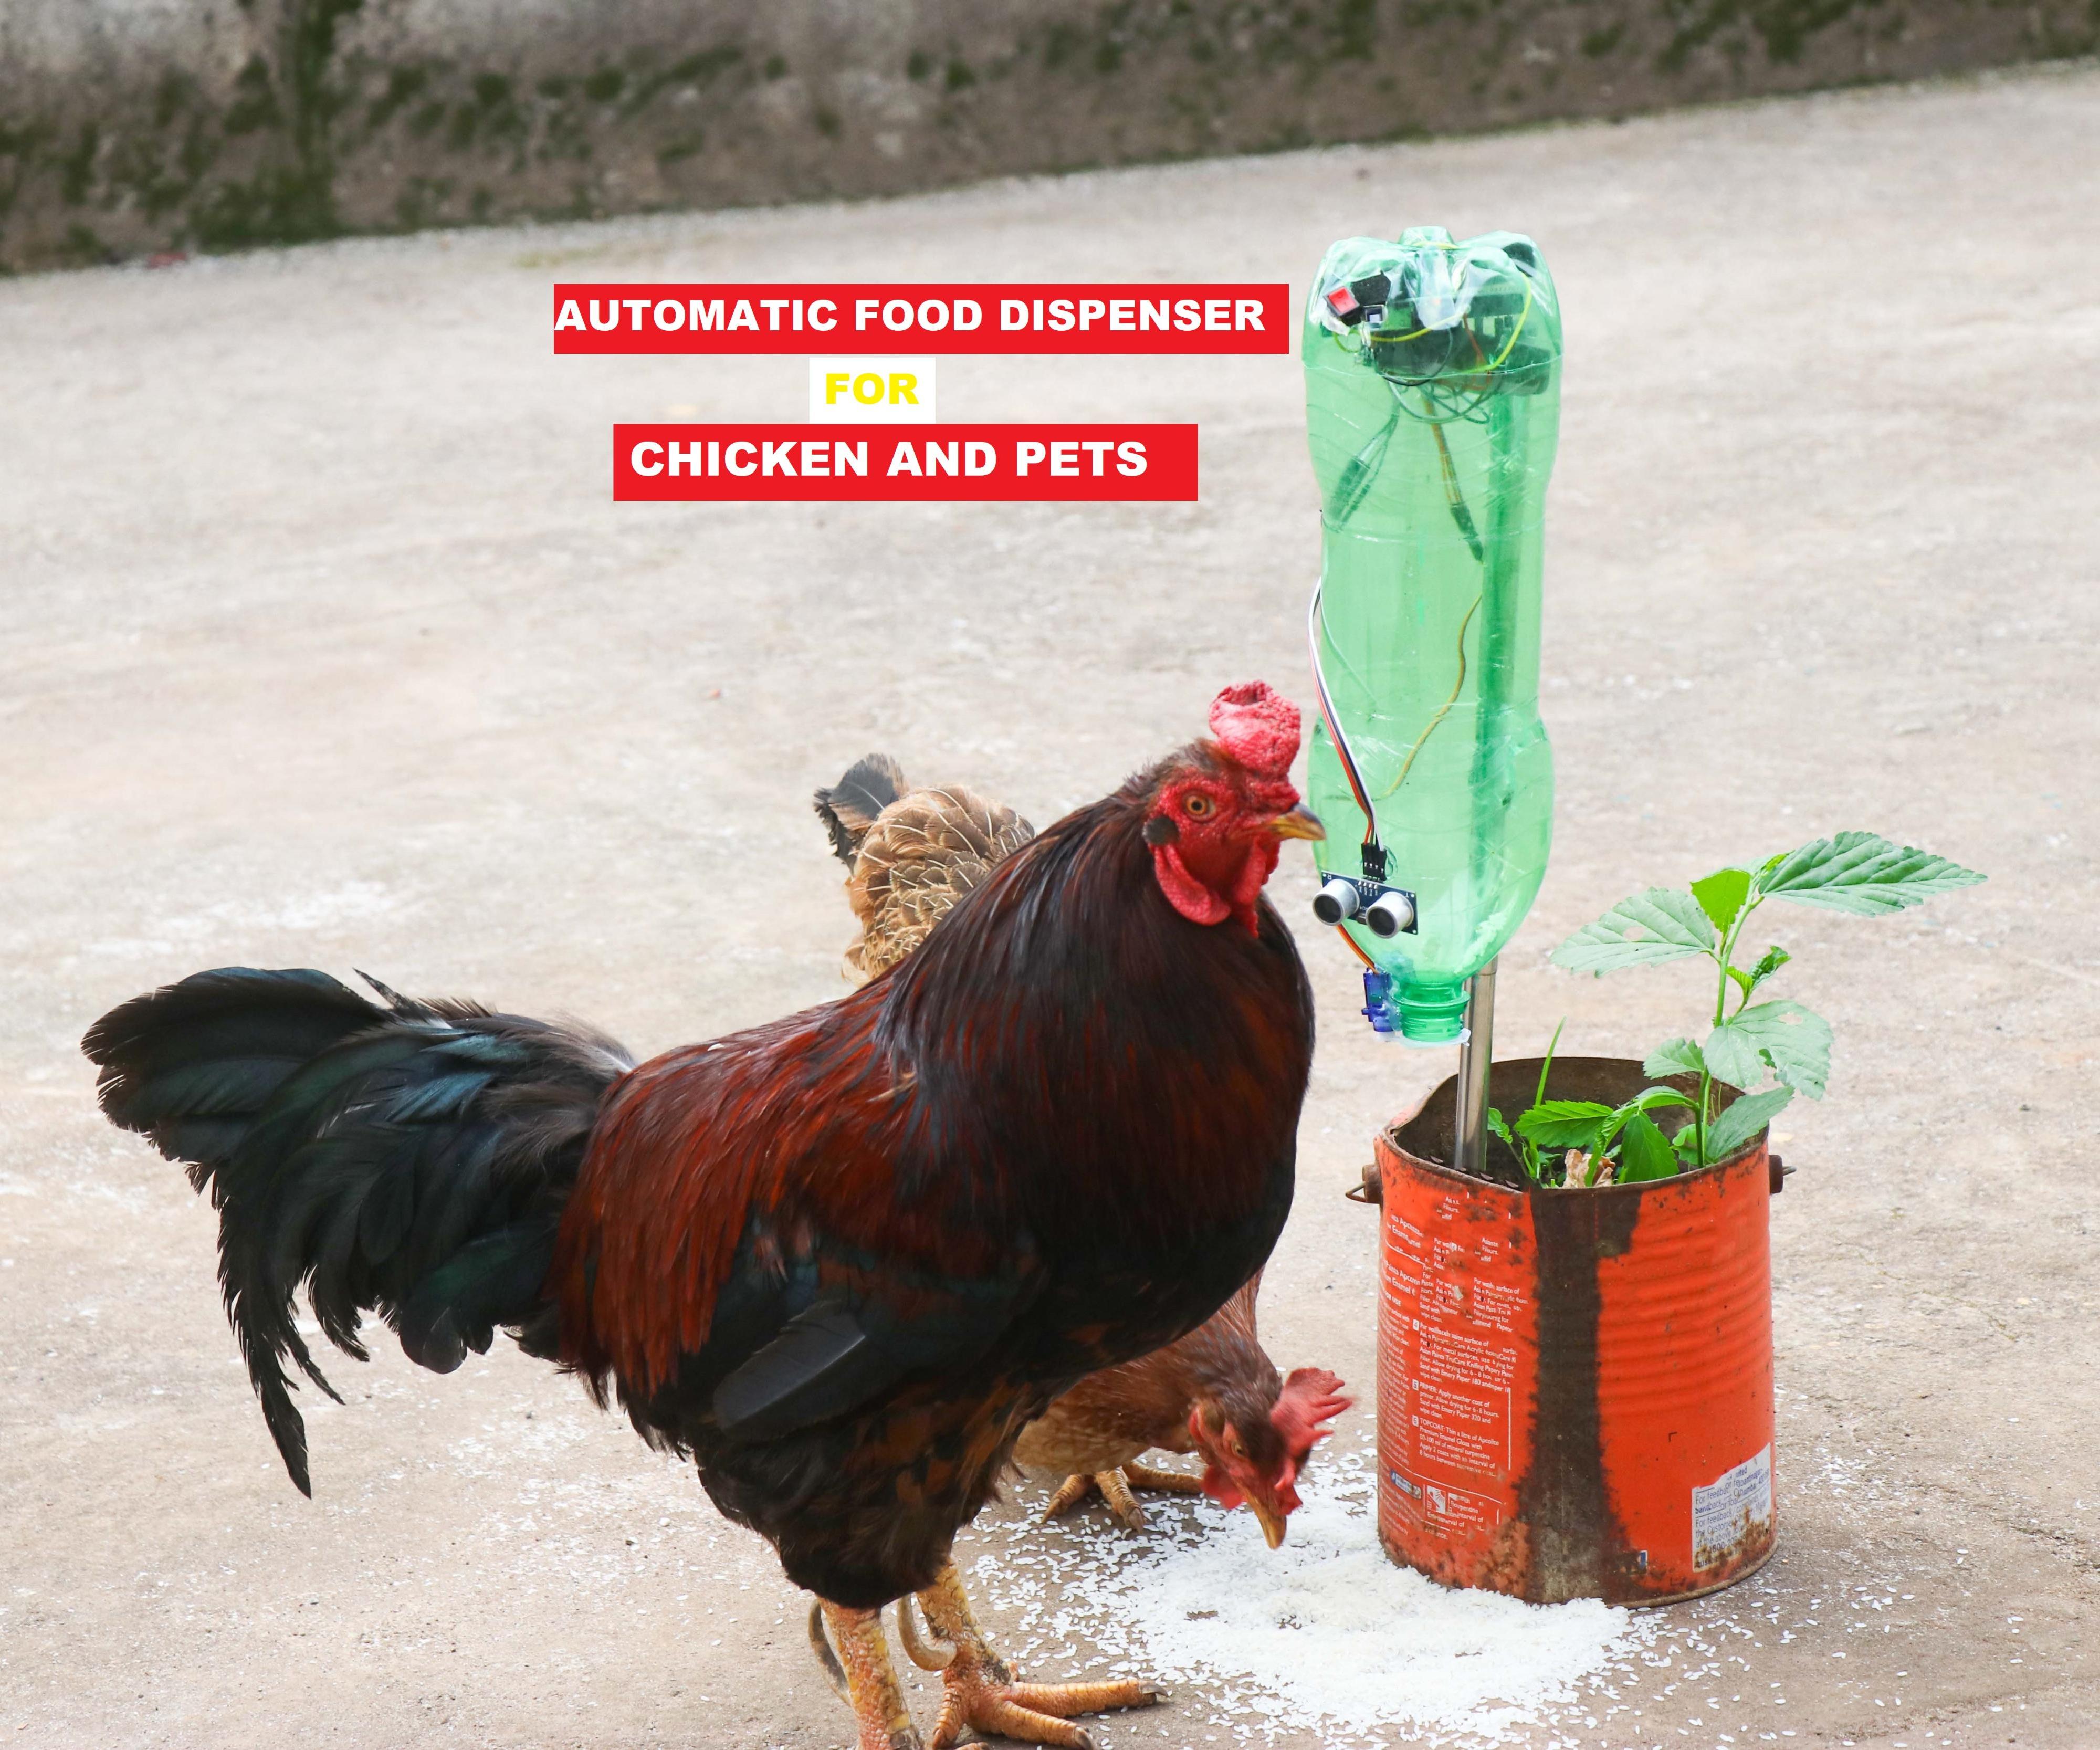 DIY Automatic Food Dispenser for Chickens and Pets